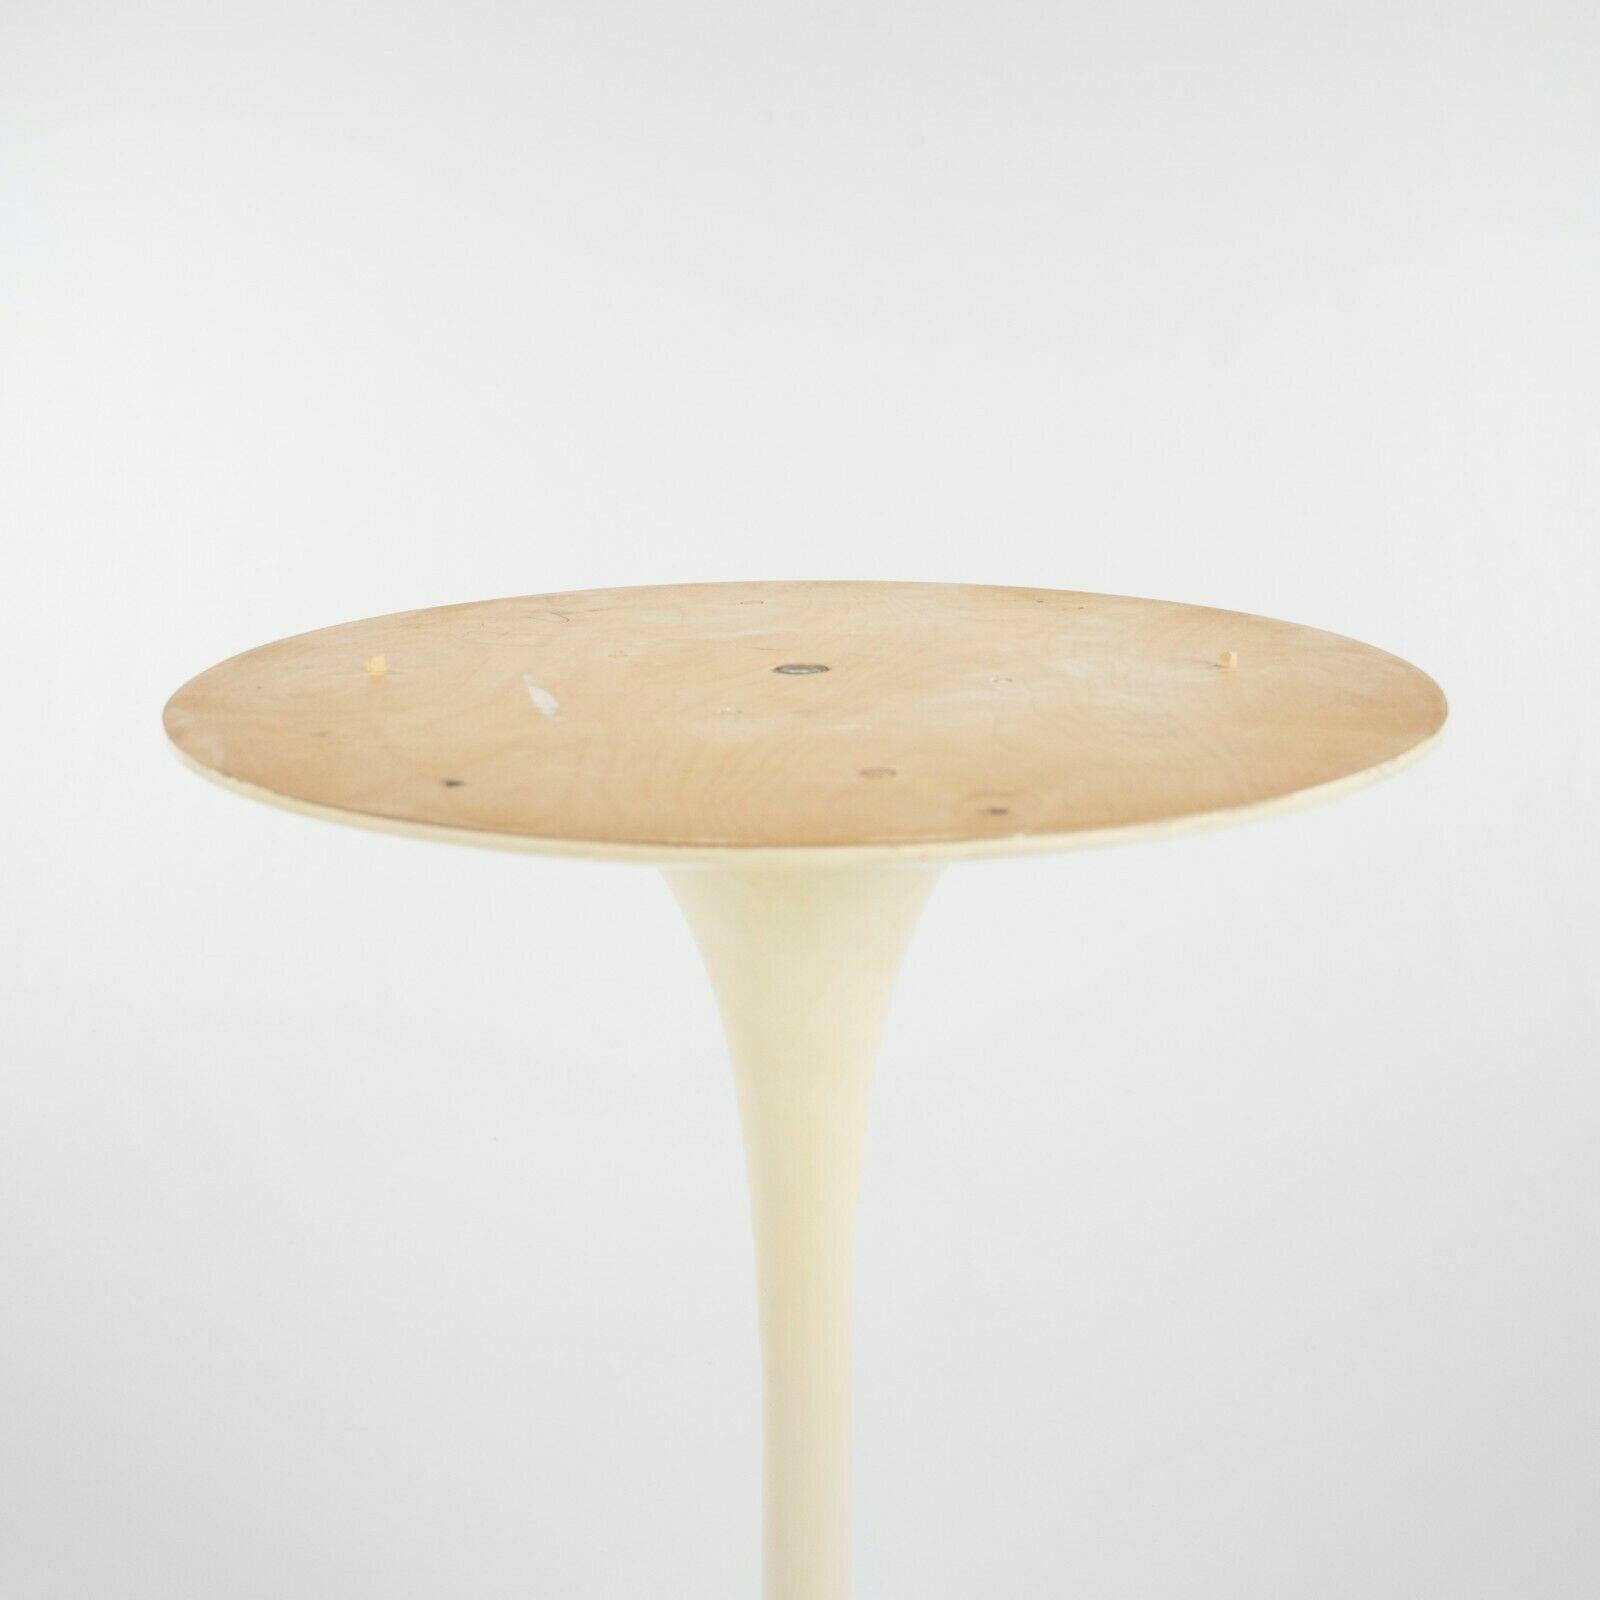 1958 Eero Saarinen for Knoll Associates Early 36 in Marble Tulip Dining Table For Sale 2